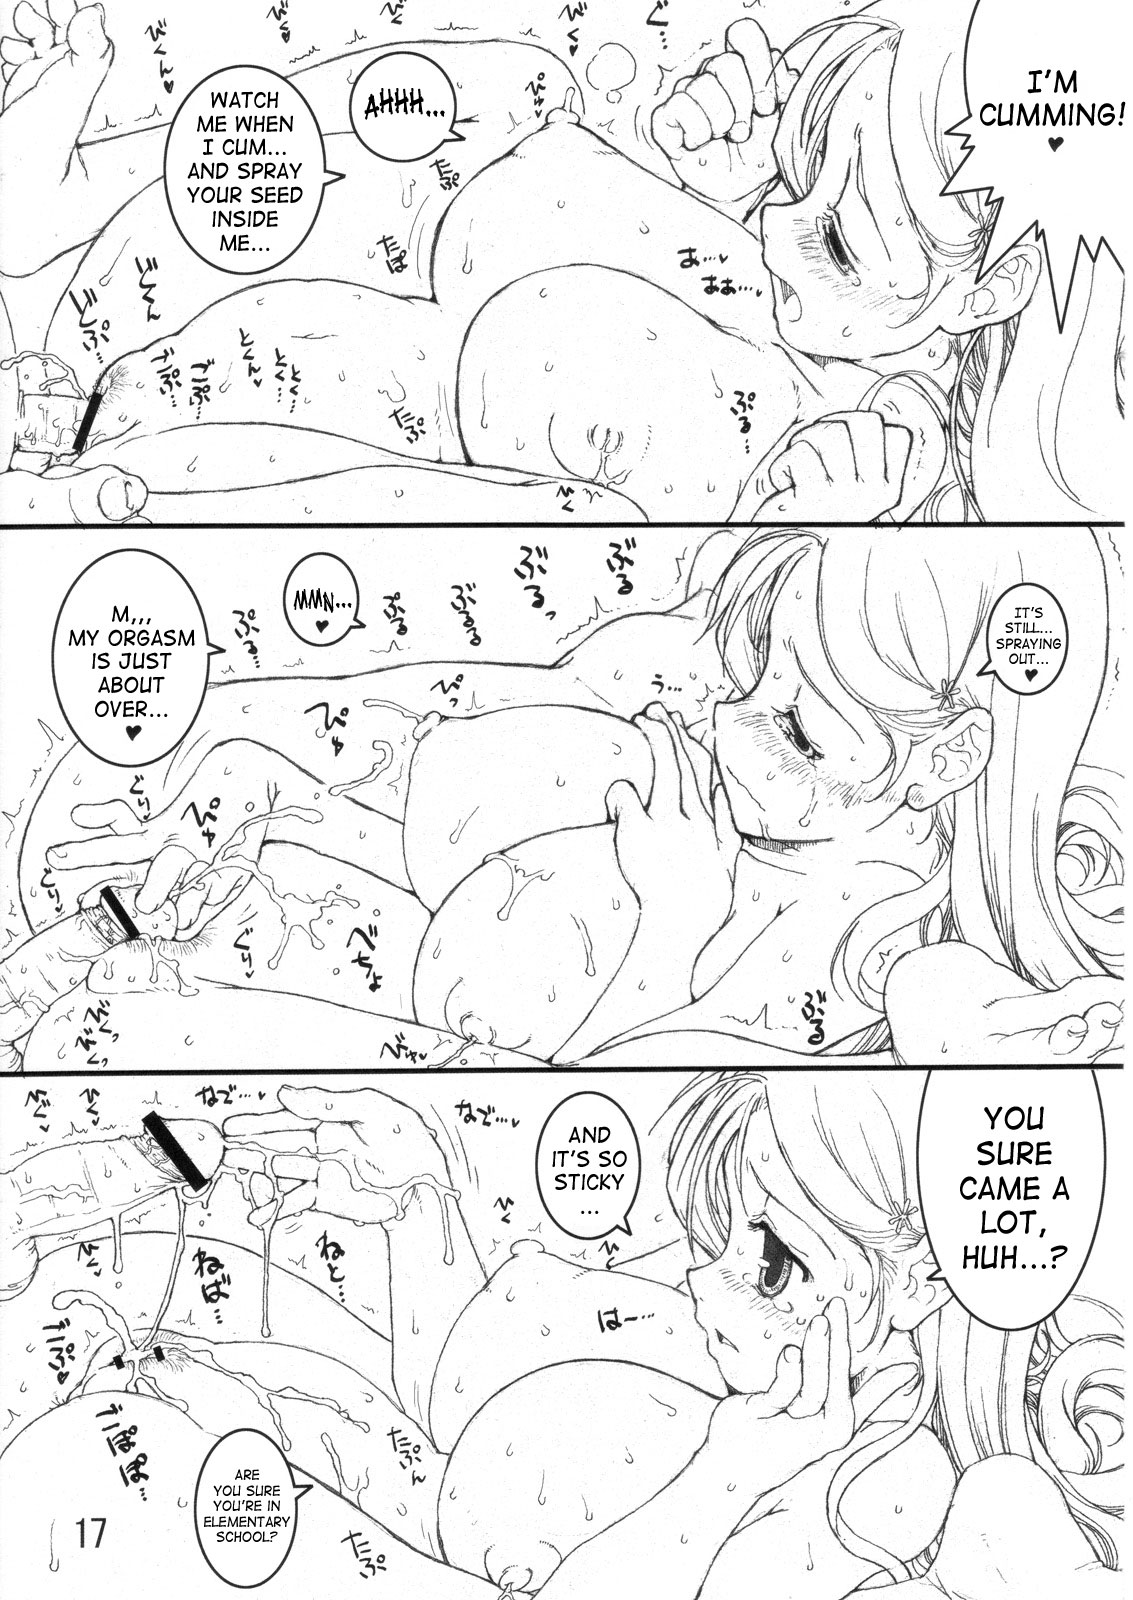 (COMIC1) [Tololinco (Tololi)] Orihime to Issho! -Stay With Orihime- (Bleach) [English] [SaHa] page 16 full